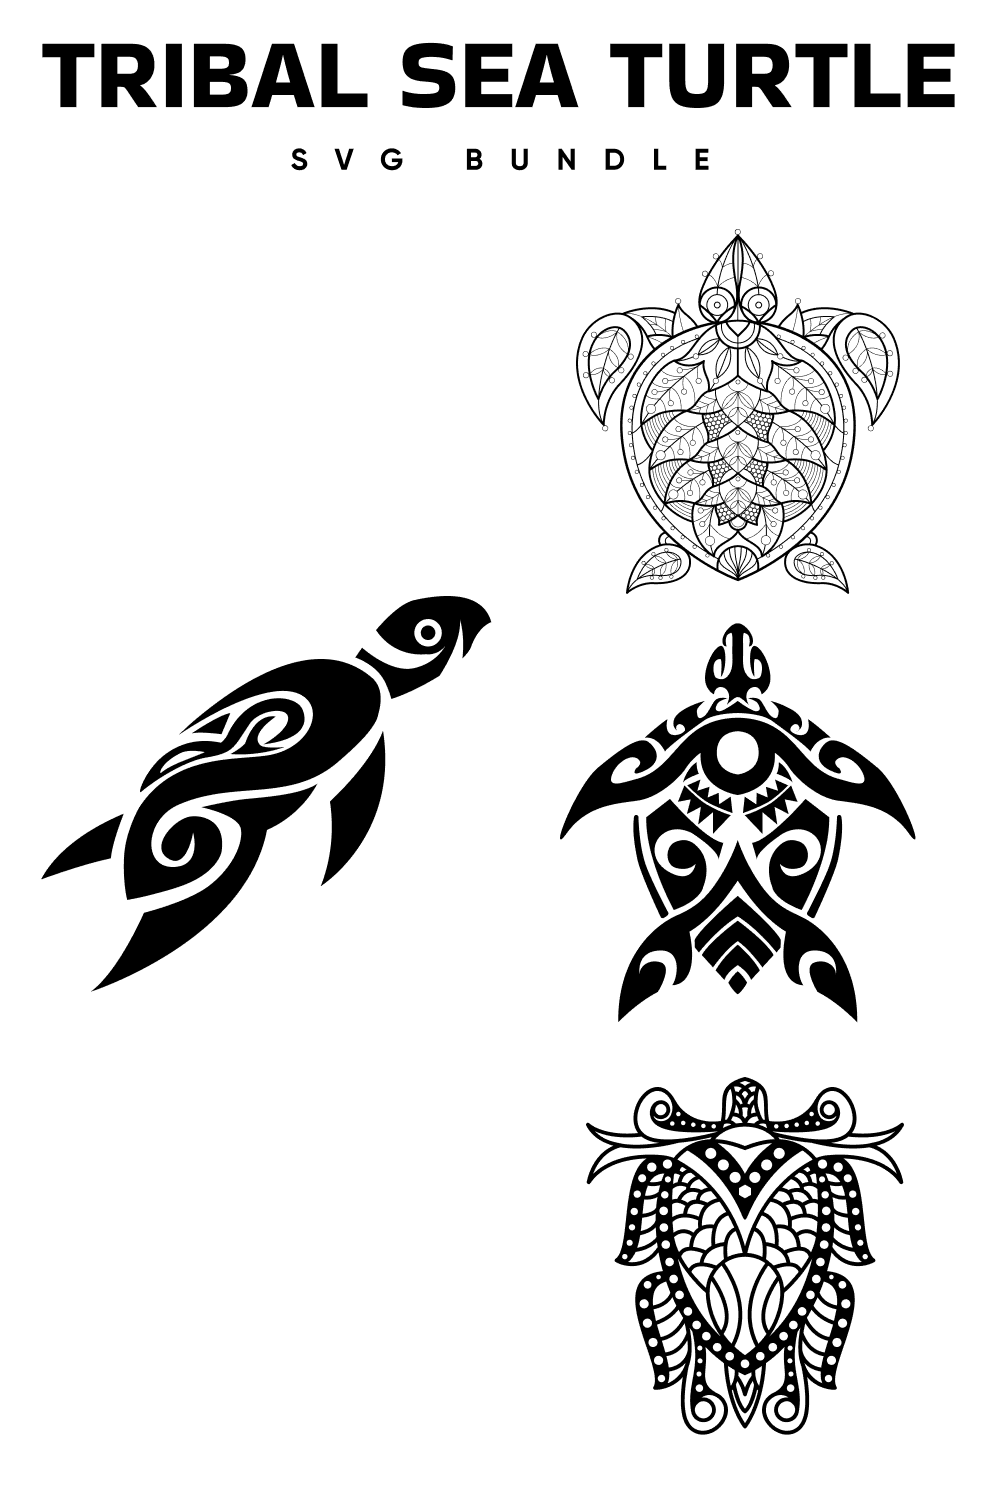 Tribal Sea Turtle SVG - pinterest image preview.